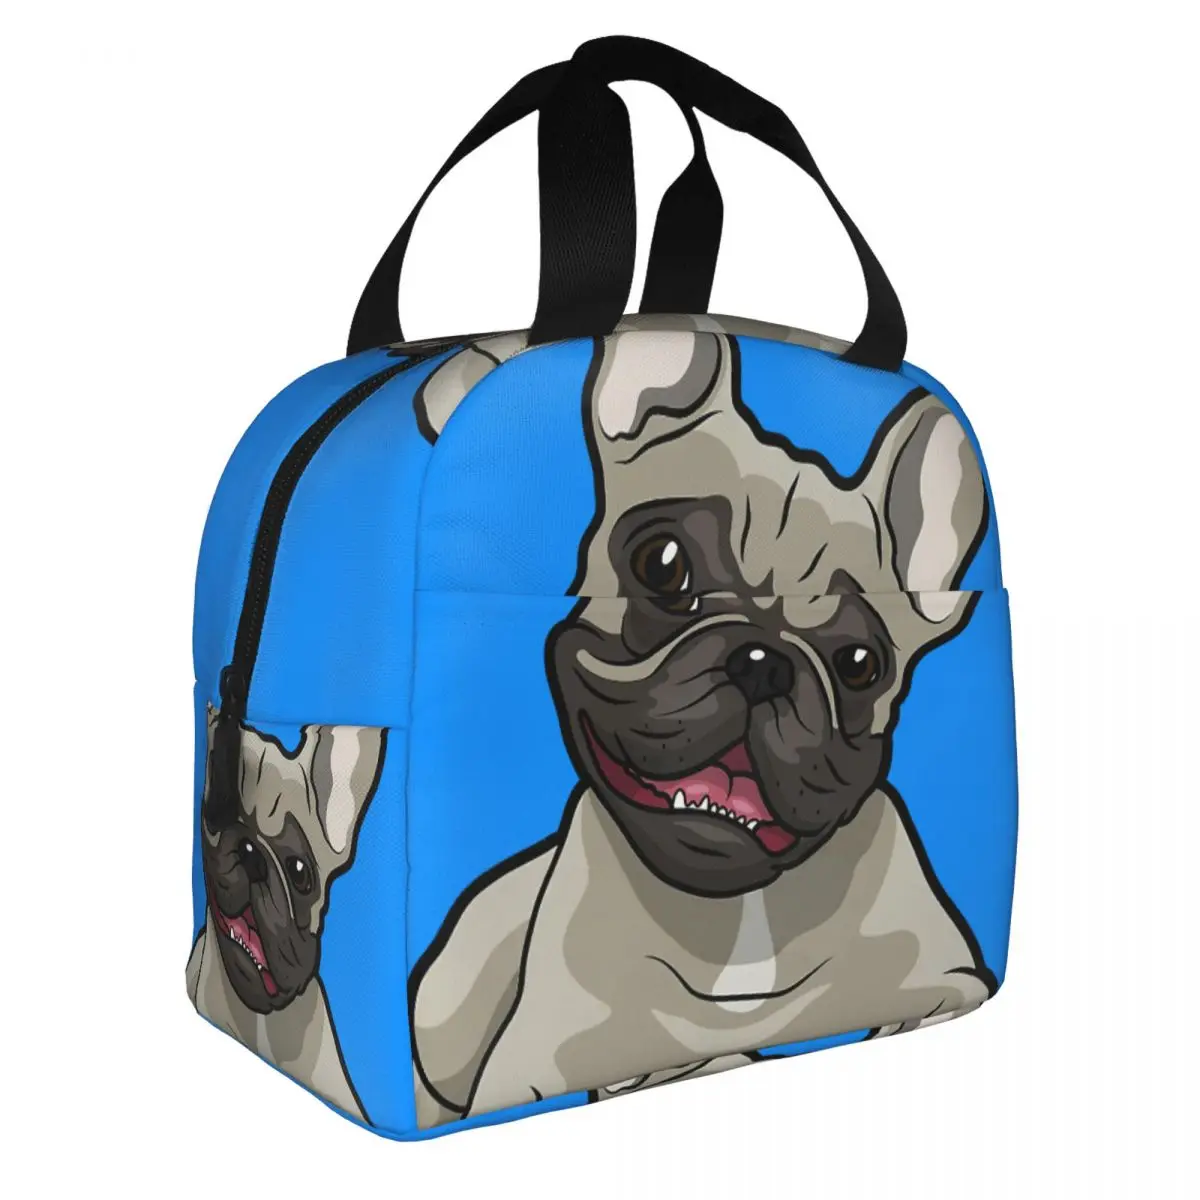 Cute French Bulldog Lunch Bento Bags Portable Aluminum Foil thickened Thermal Cloth Lunch Bag for Women Men Boy